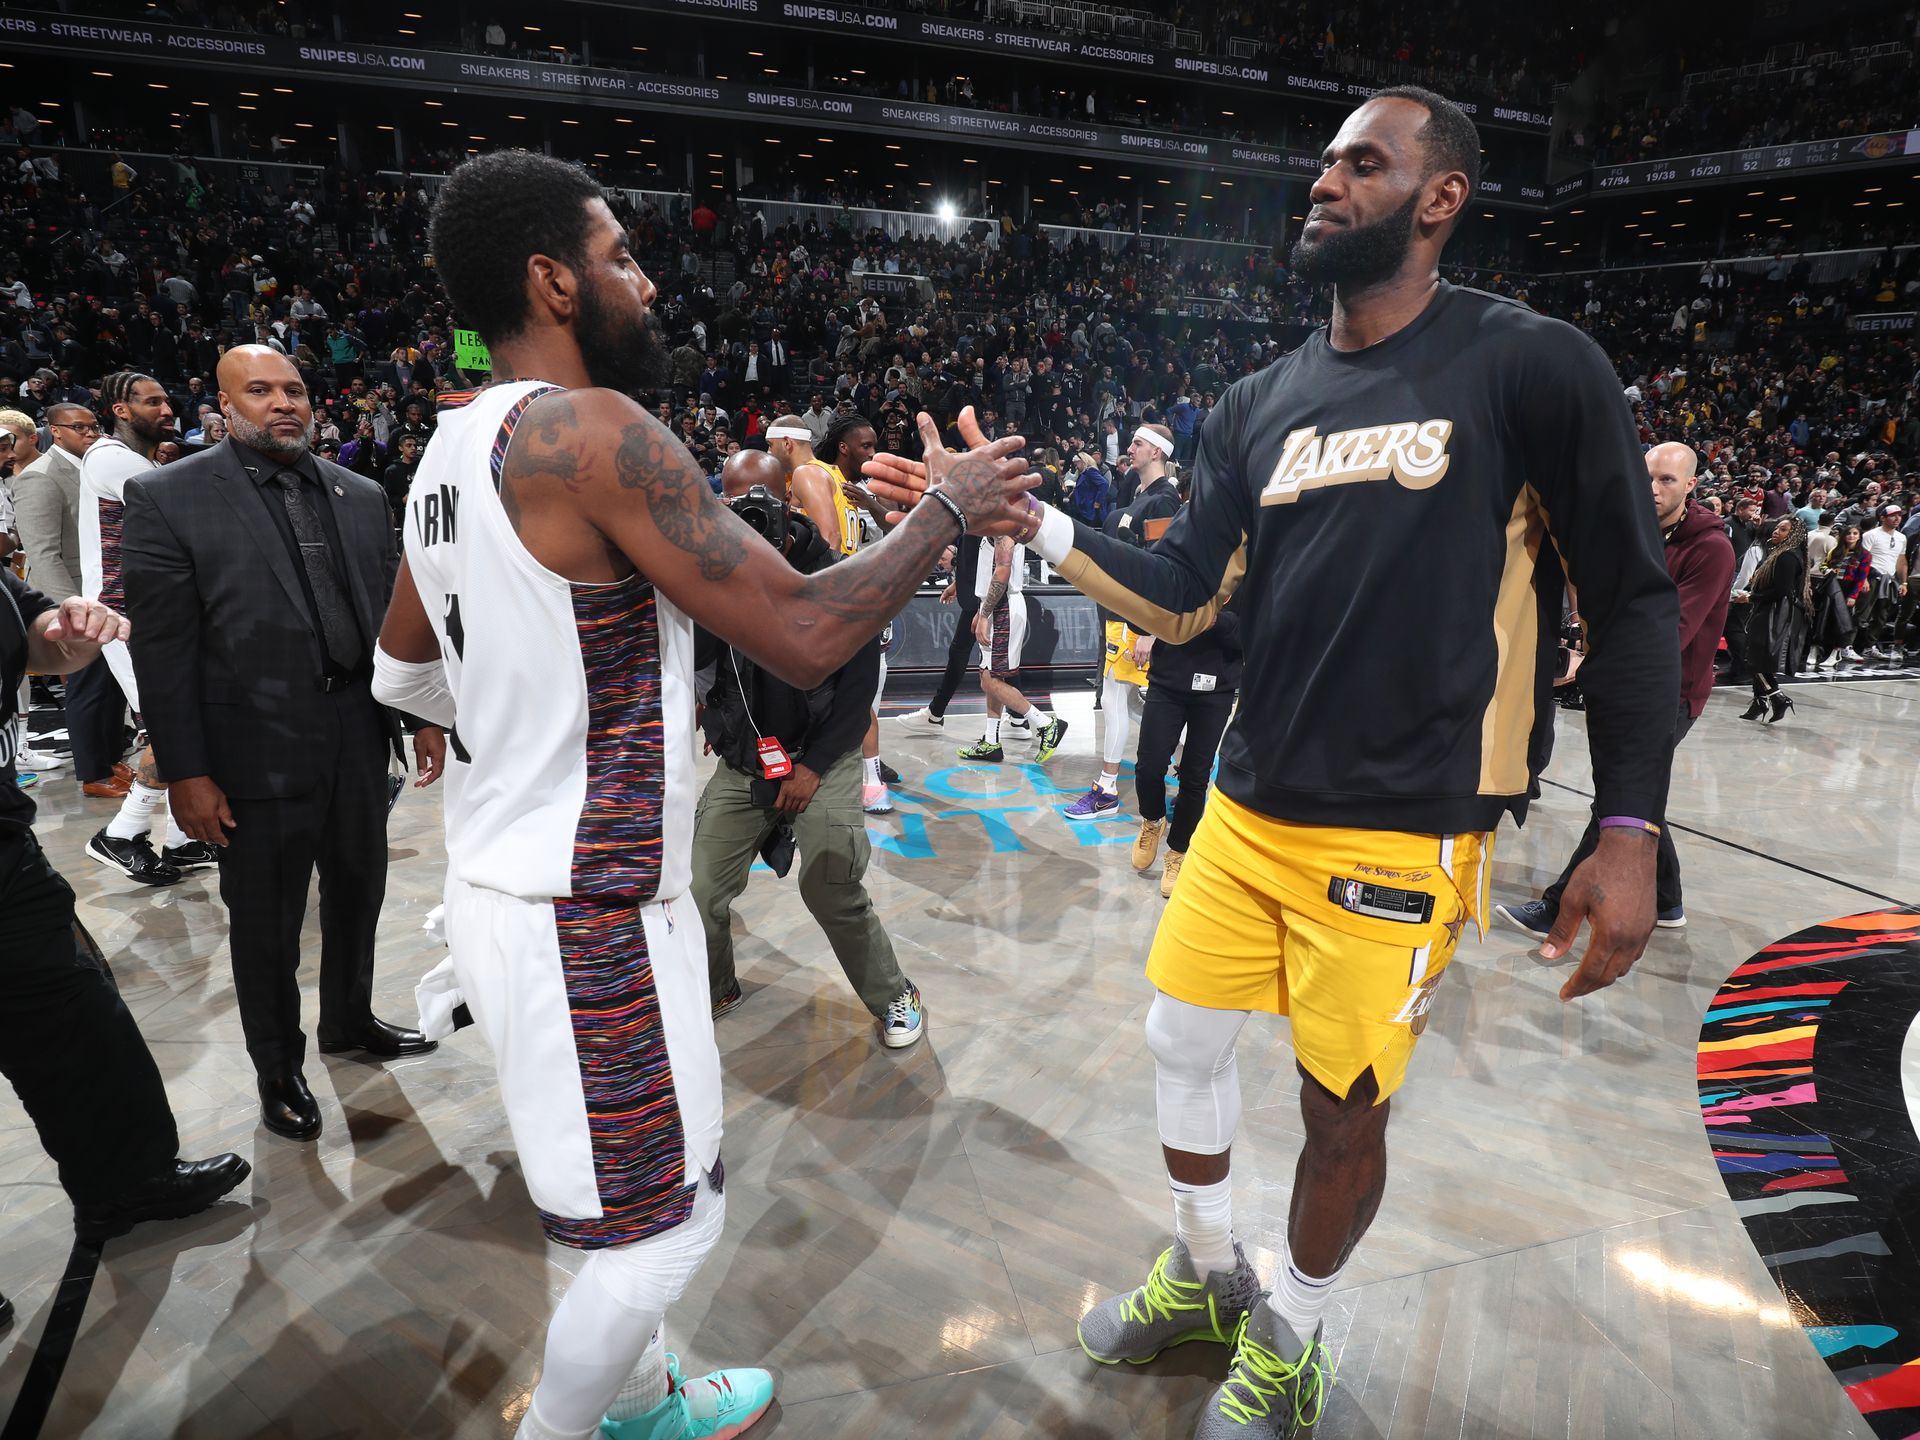 LeBron James: Kyrie Irving 'caused some harm' in sharing antisemitic  documentary